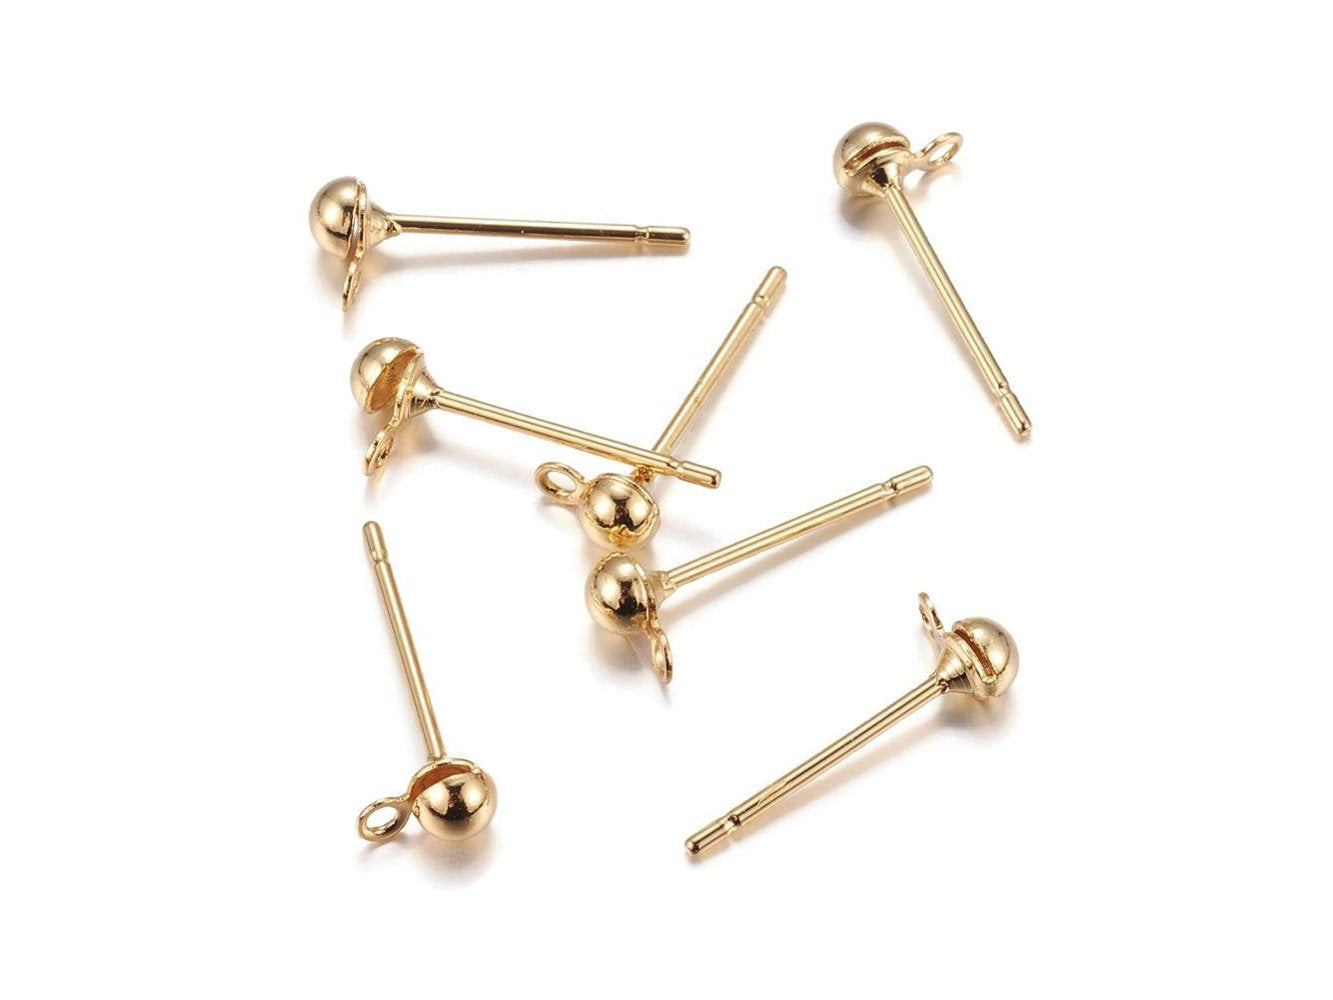 Brass earring stud posts, 3mm ball with loop, gold. Nickel free, lead free and cadmium free